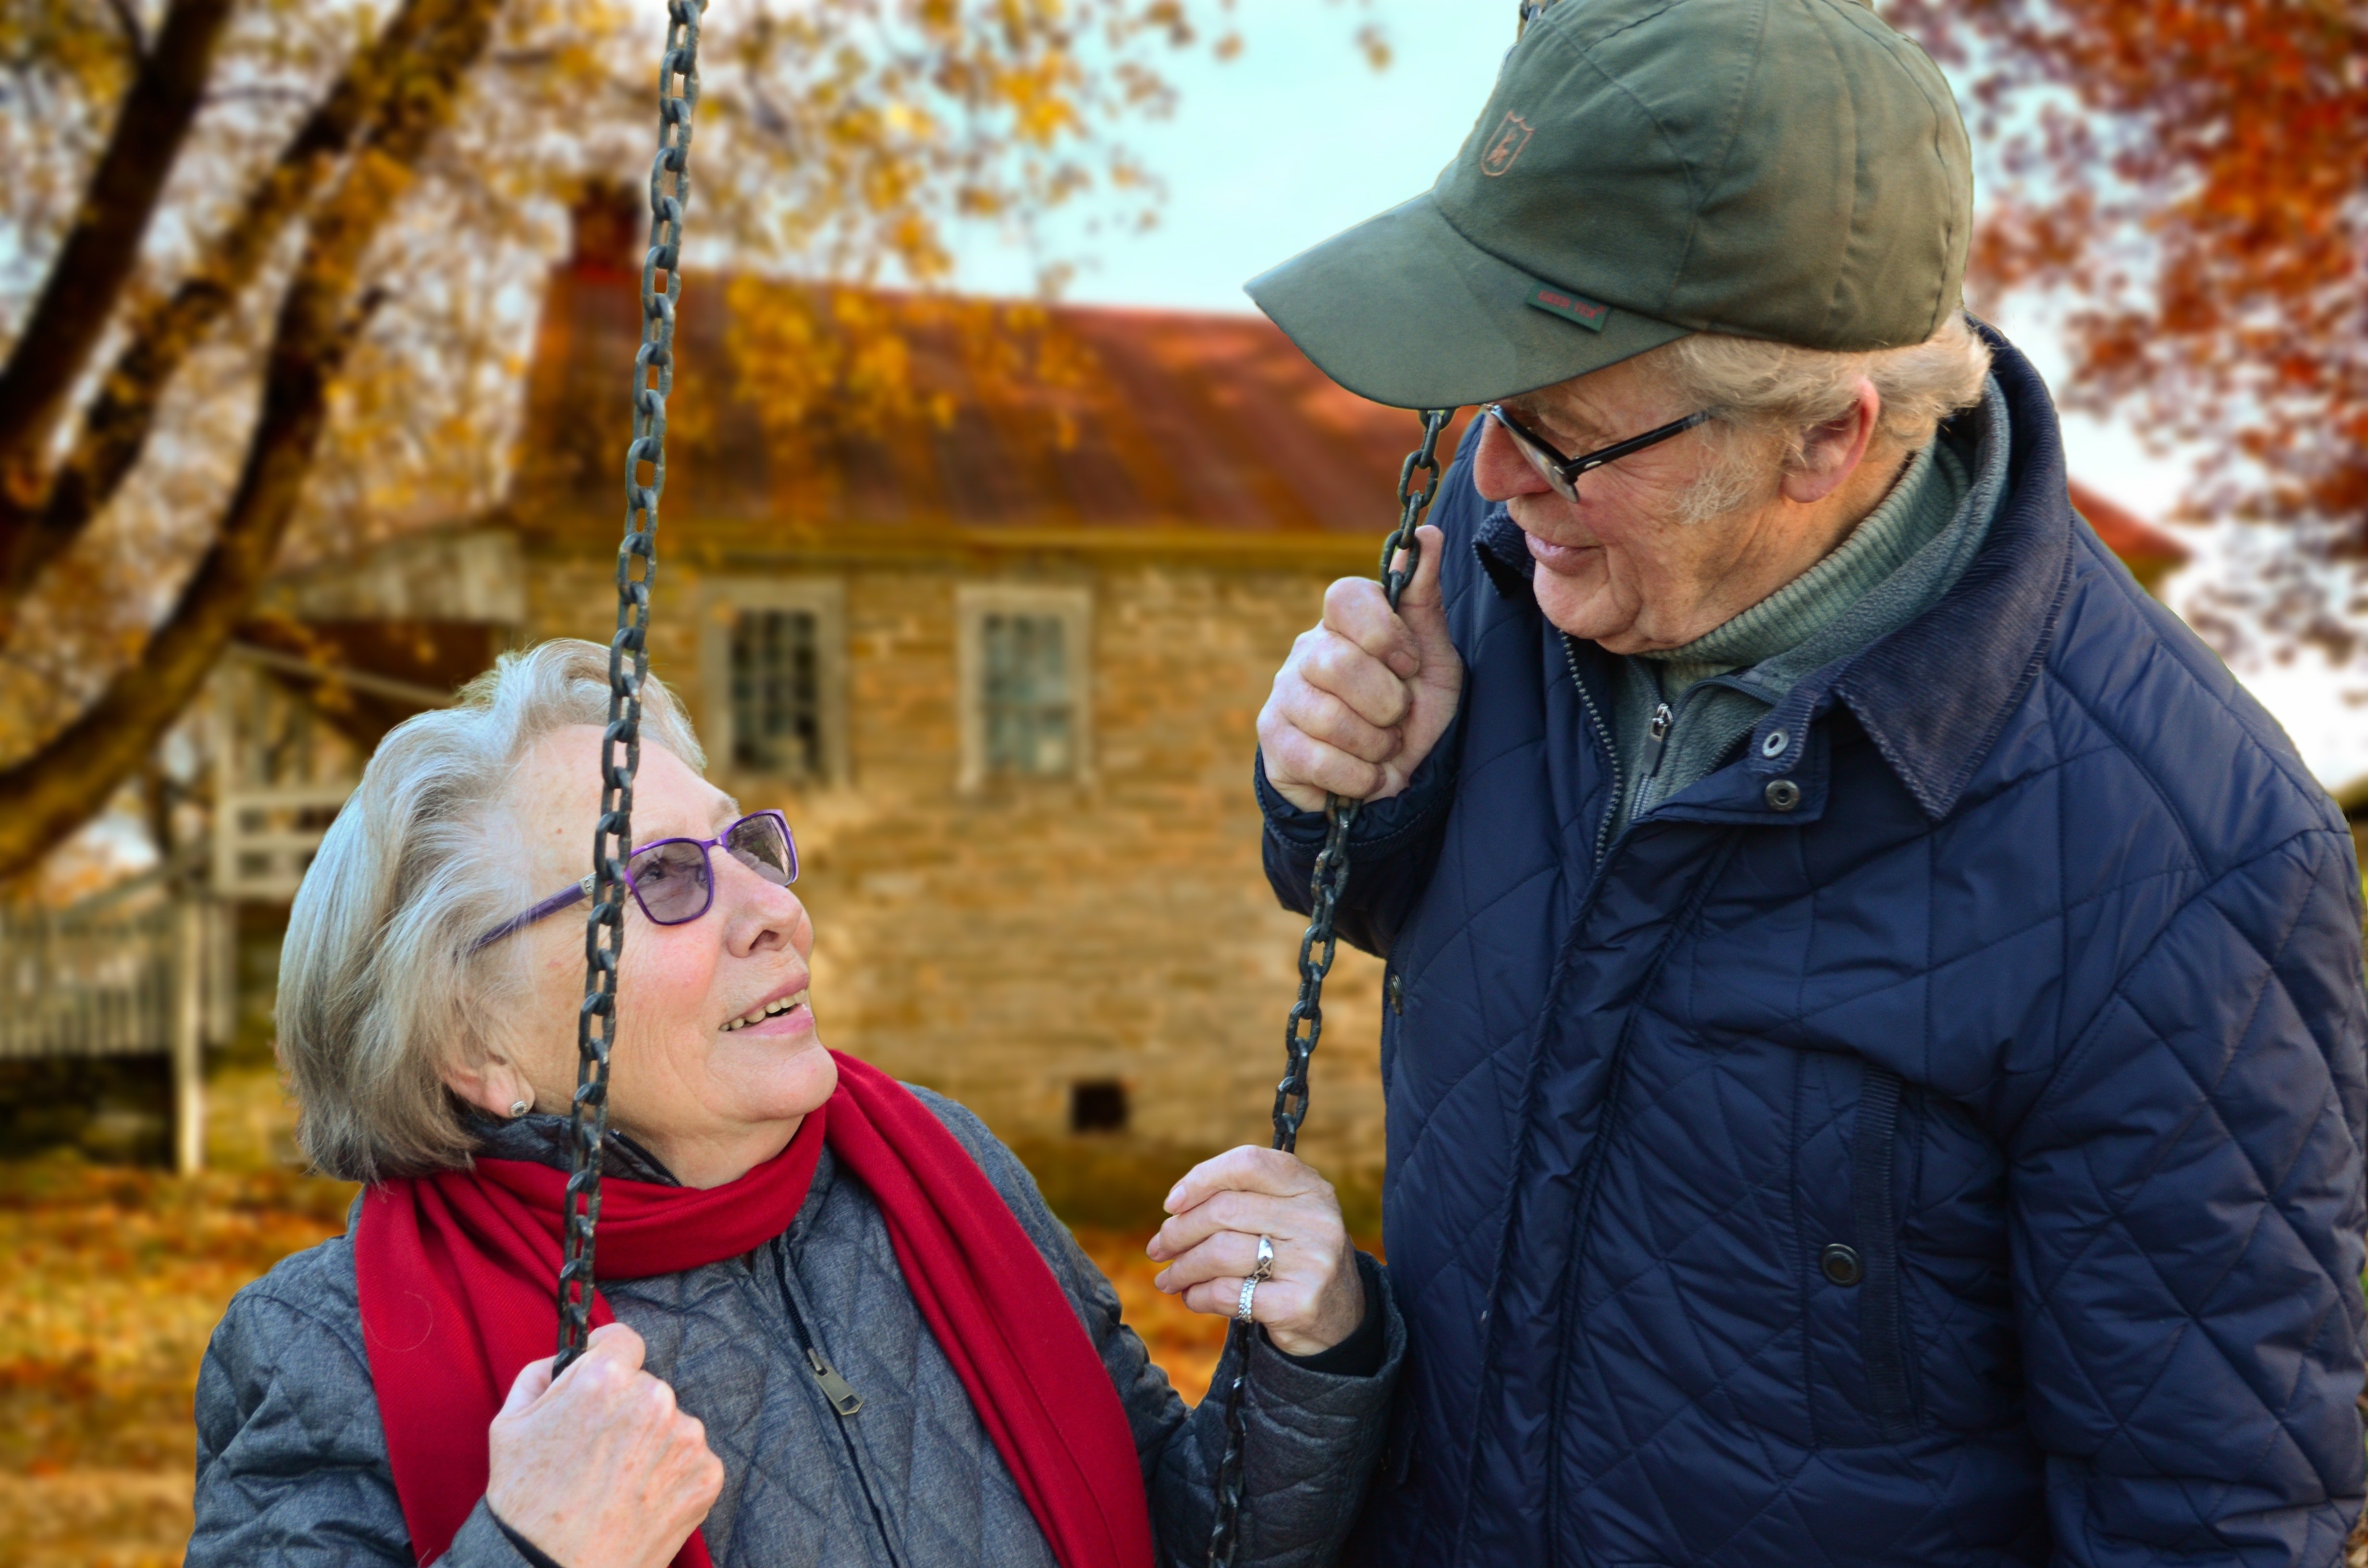 Old man and old woman having a discussion outdoor | Photo: Pexels